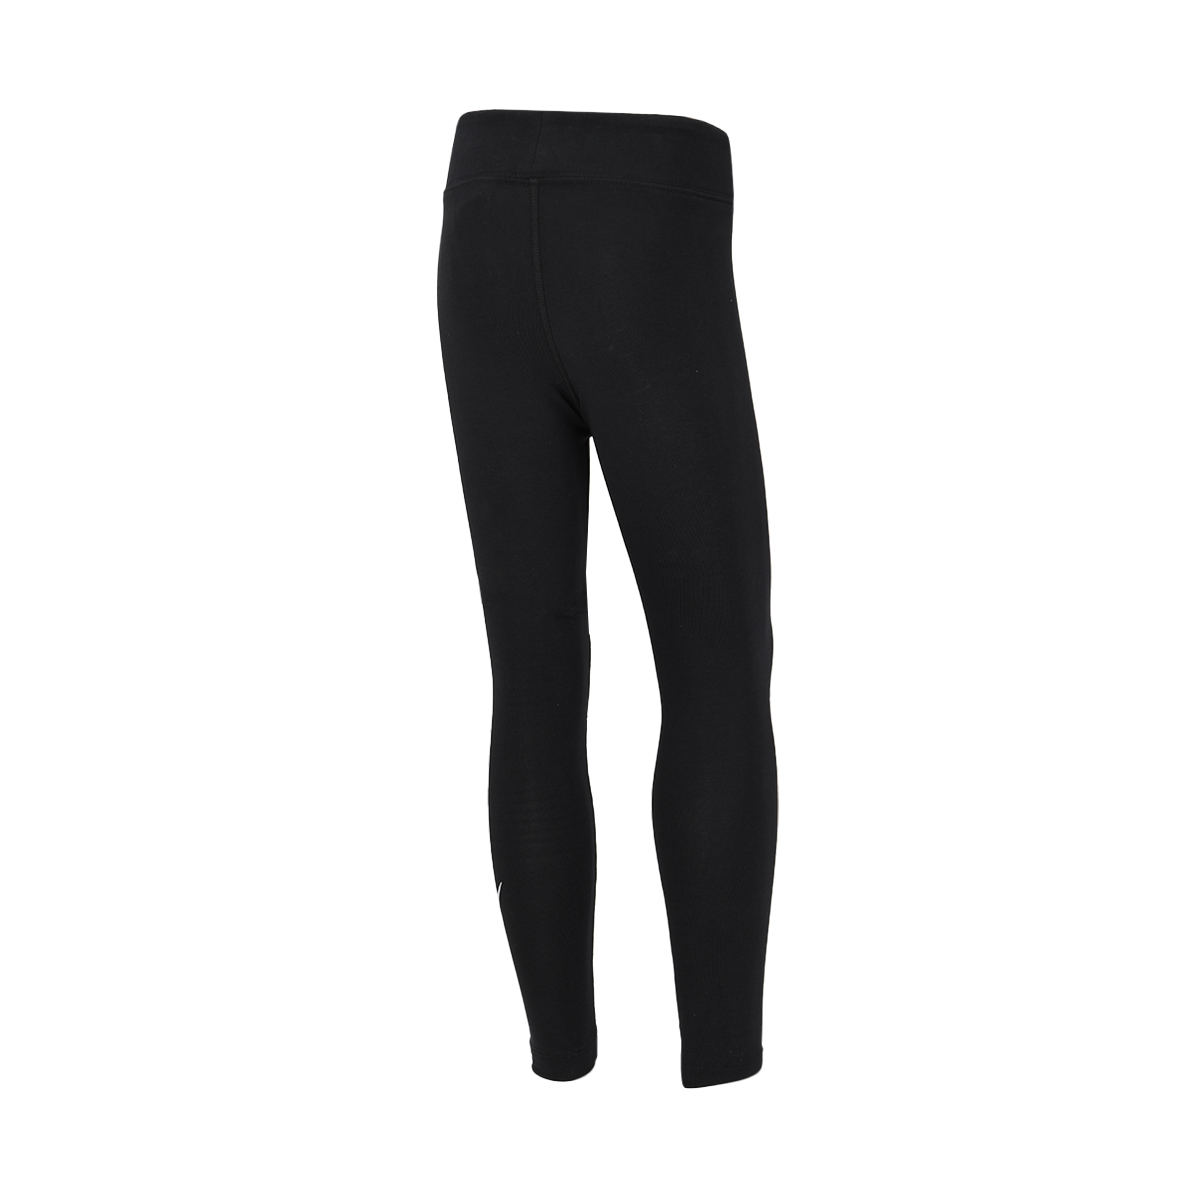 Calza Nike Nsw Essential Legging Energy,  image number null